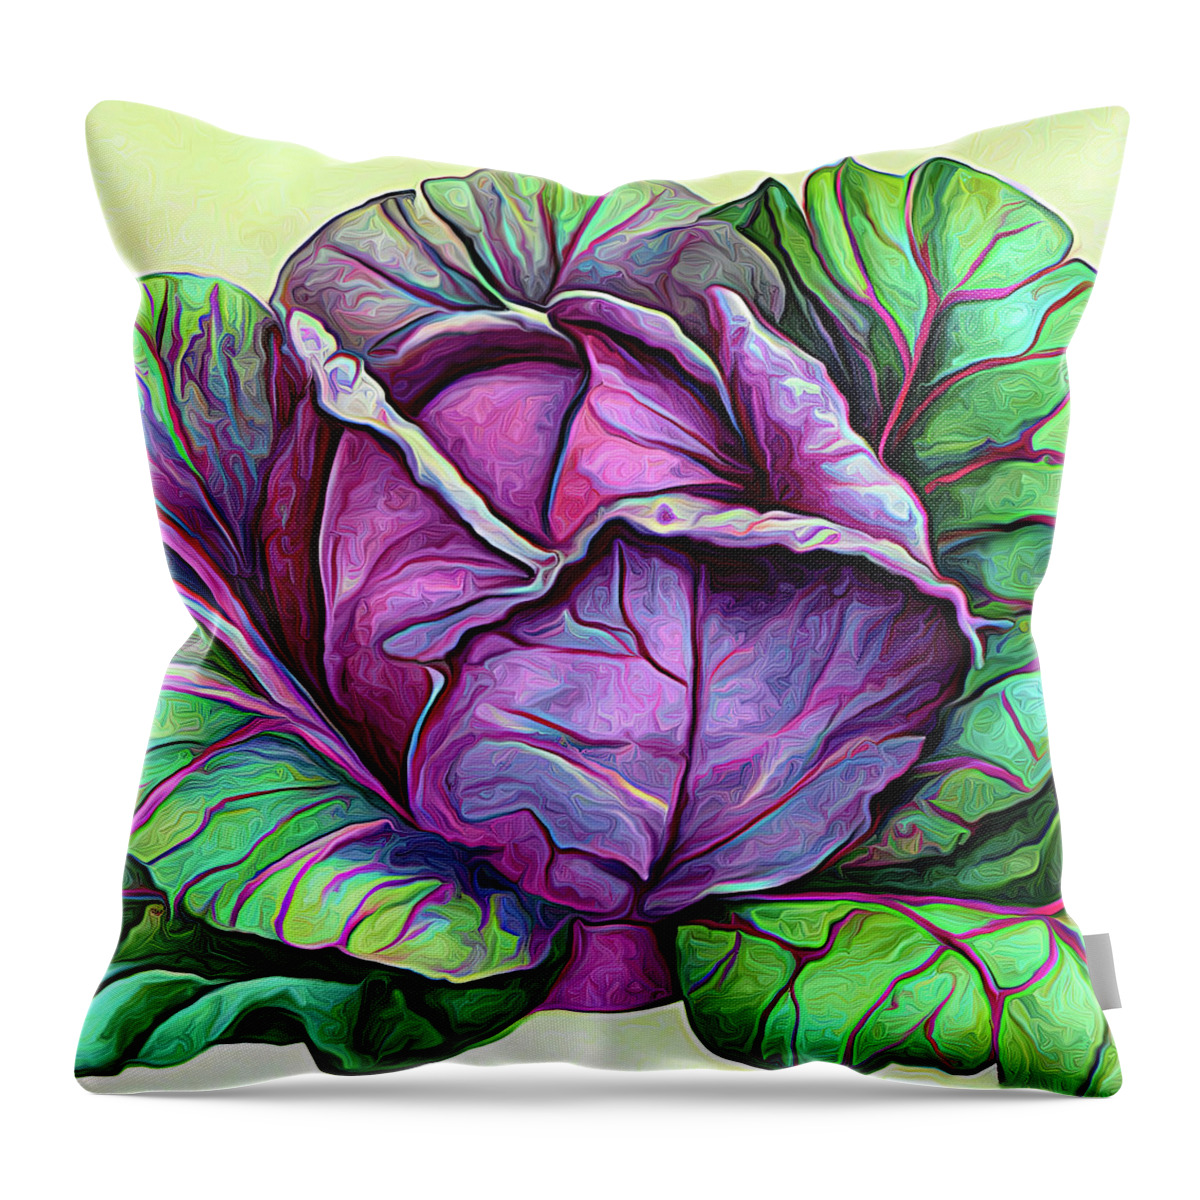 Purple Cabbage Throw Pillow featuring the digital art Purple Cabbage 5a by Cathy Anderson